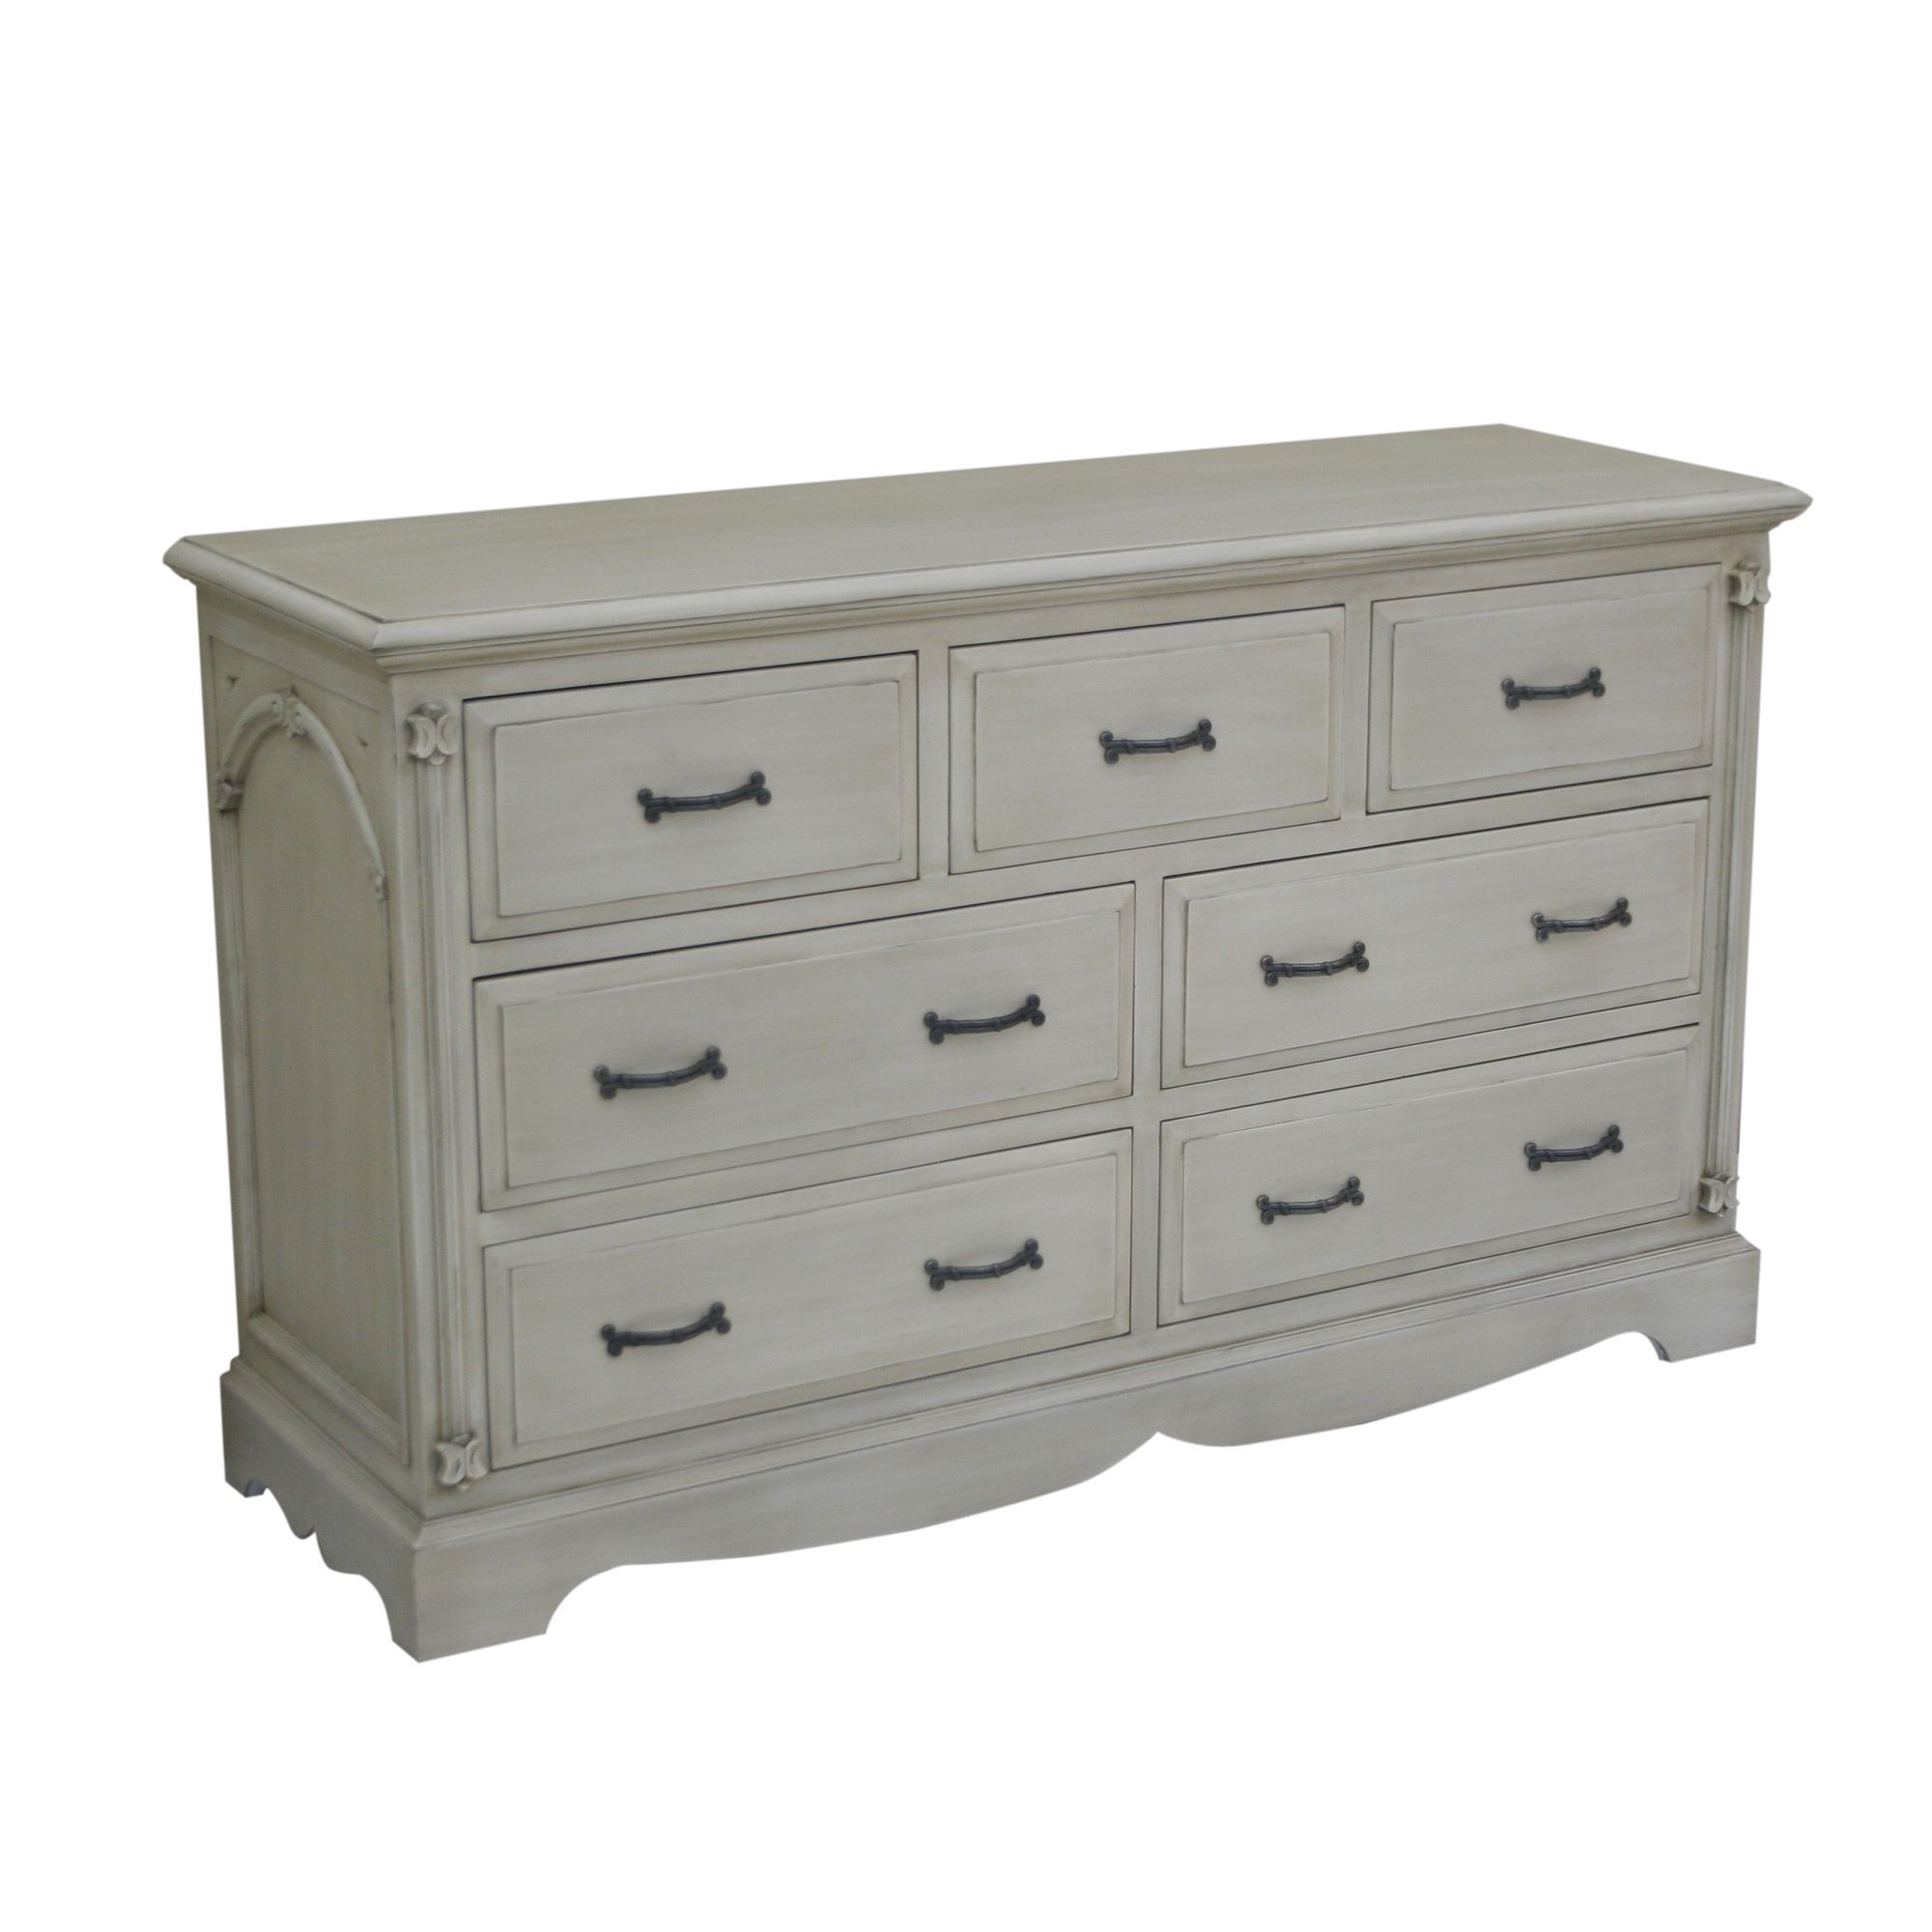 Thorndon Beverley Bedroom Seven Drawer Multi Chest in Distressed Ivory at Tesco Direct